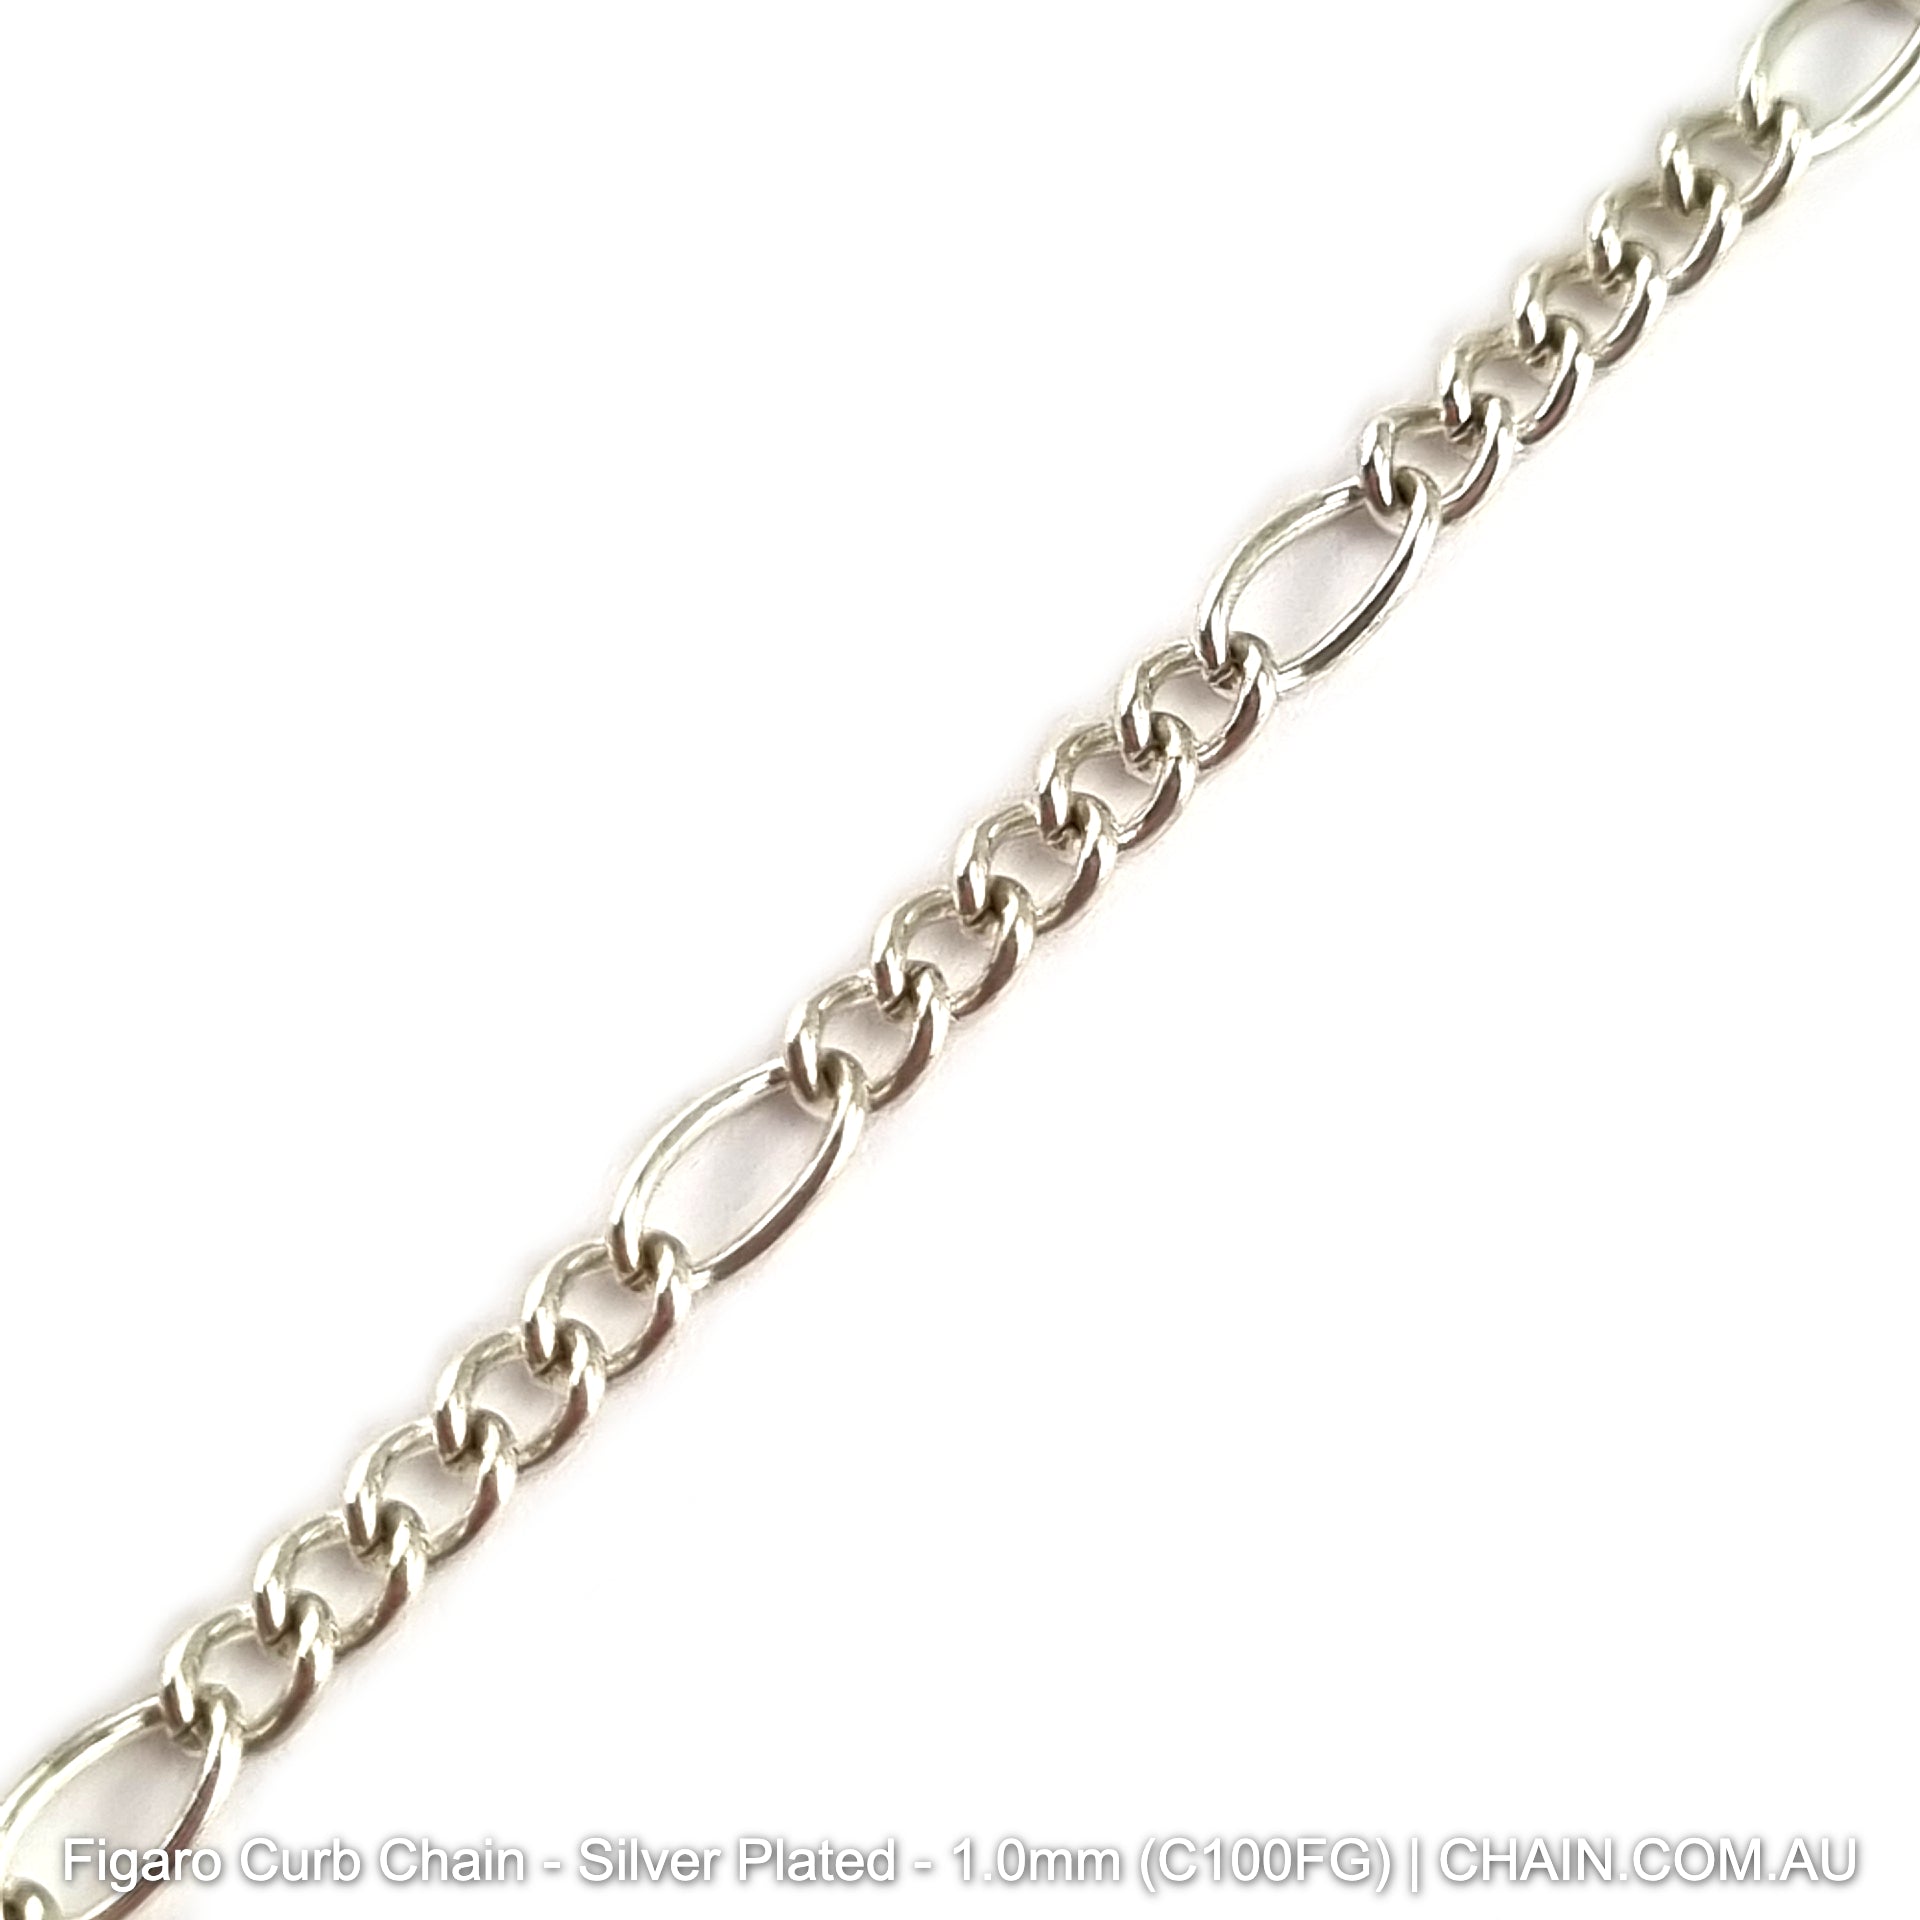 Figaro Curb Chain Silver Plated. Size: 1.0mm, C100FG. 25m Reel. Shop Jewellery Chain online. Australia wide shipping. Chain.com.au